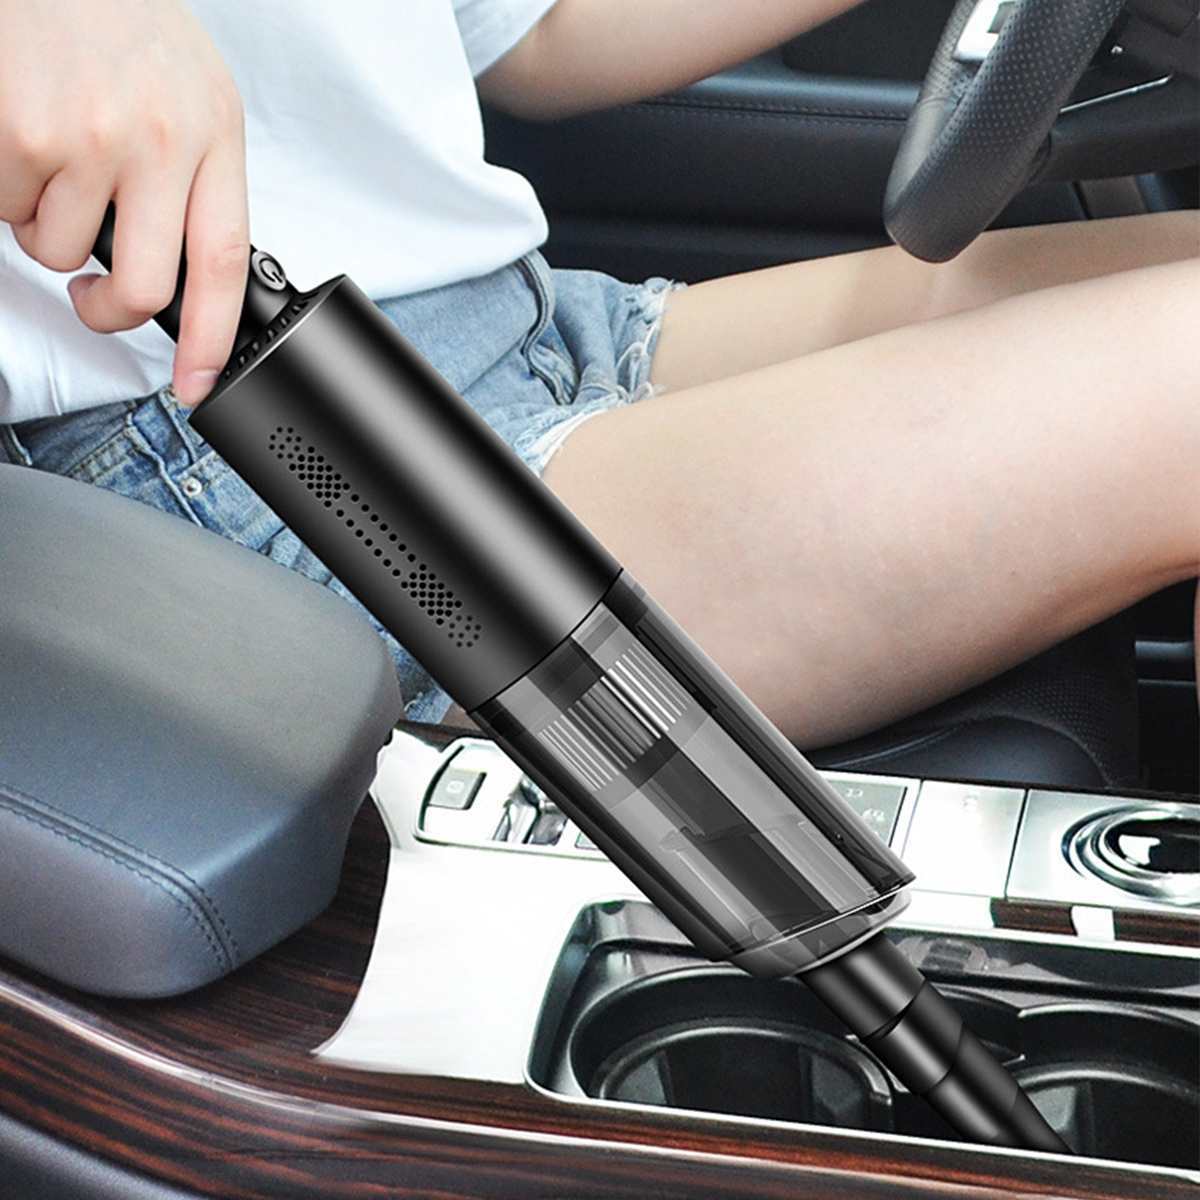 Car Vacuum Cleaner Without Lights, Wireless Vacuum Cleaner, Car Portable Wet And Dry Vacuum Cleaner, Car Home Dual Purpose